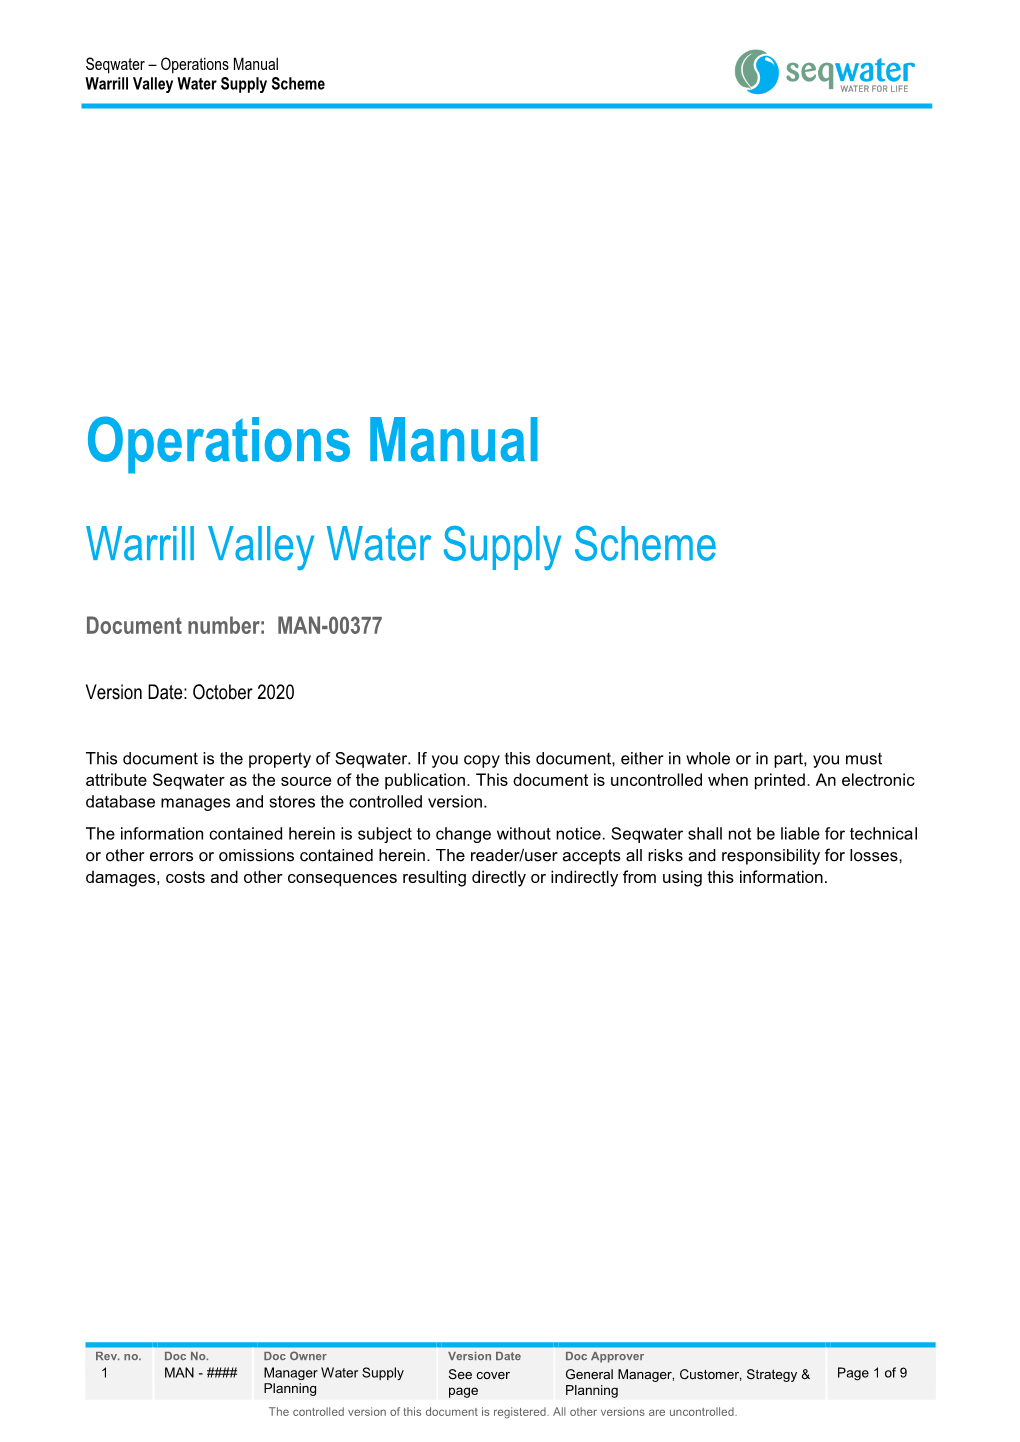 Operations Manual Warrill Valley Water Supply Scheme